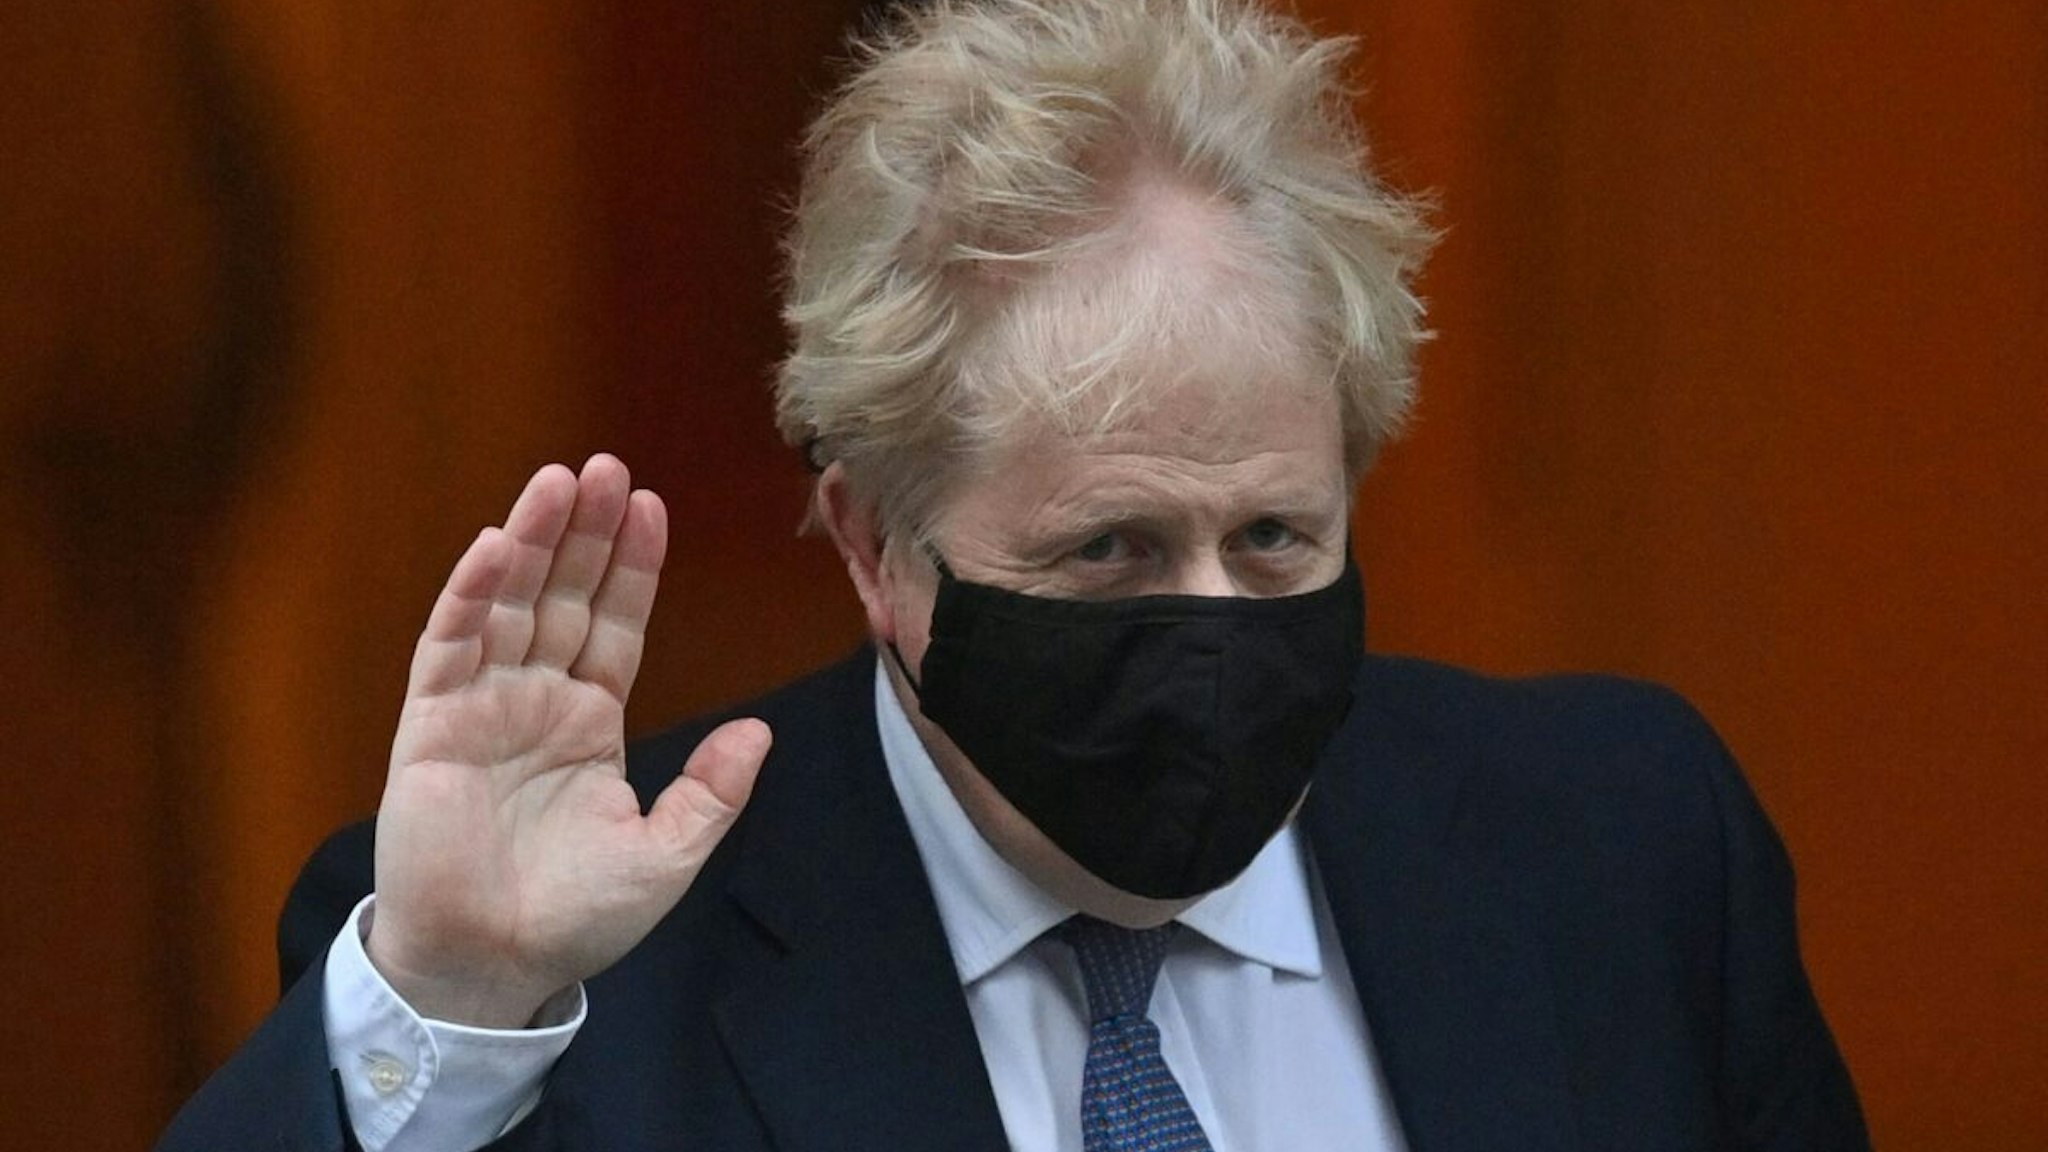 Britain's Prime Minister Boris Johnson, wearing a face covering to help mitigate the spread of coronavirus, leaves from 10 Downing Street in central London on January 5, 2022, to take part in the weekly session of Prime Minister Questions (PMQs) at the House of Commons.